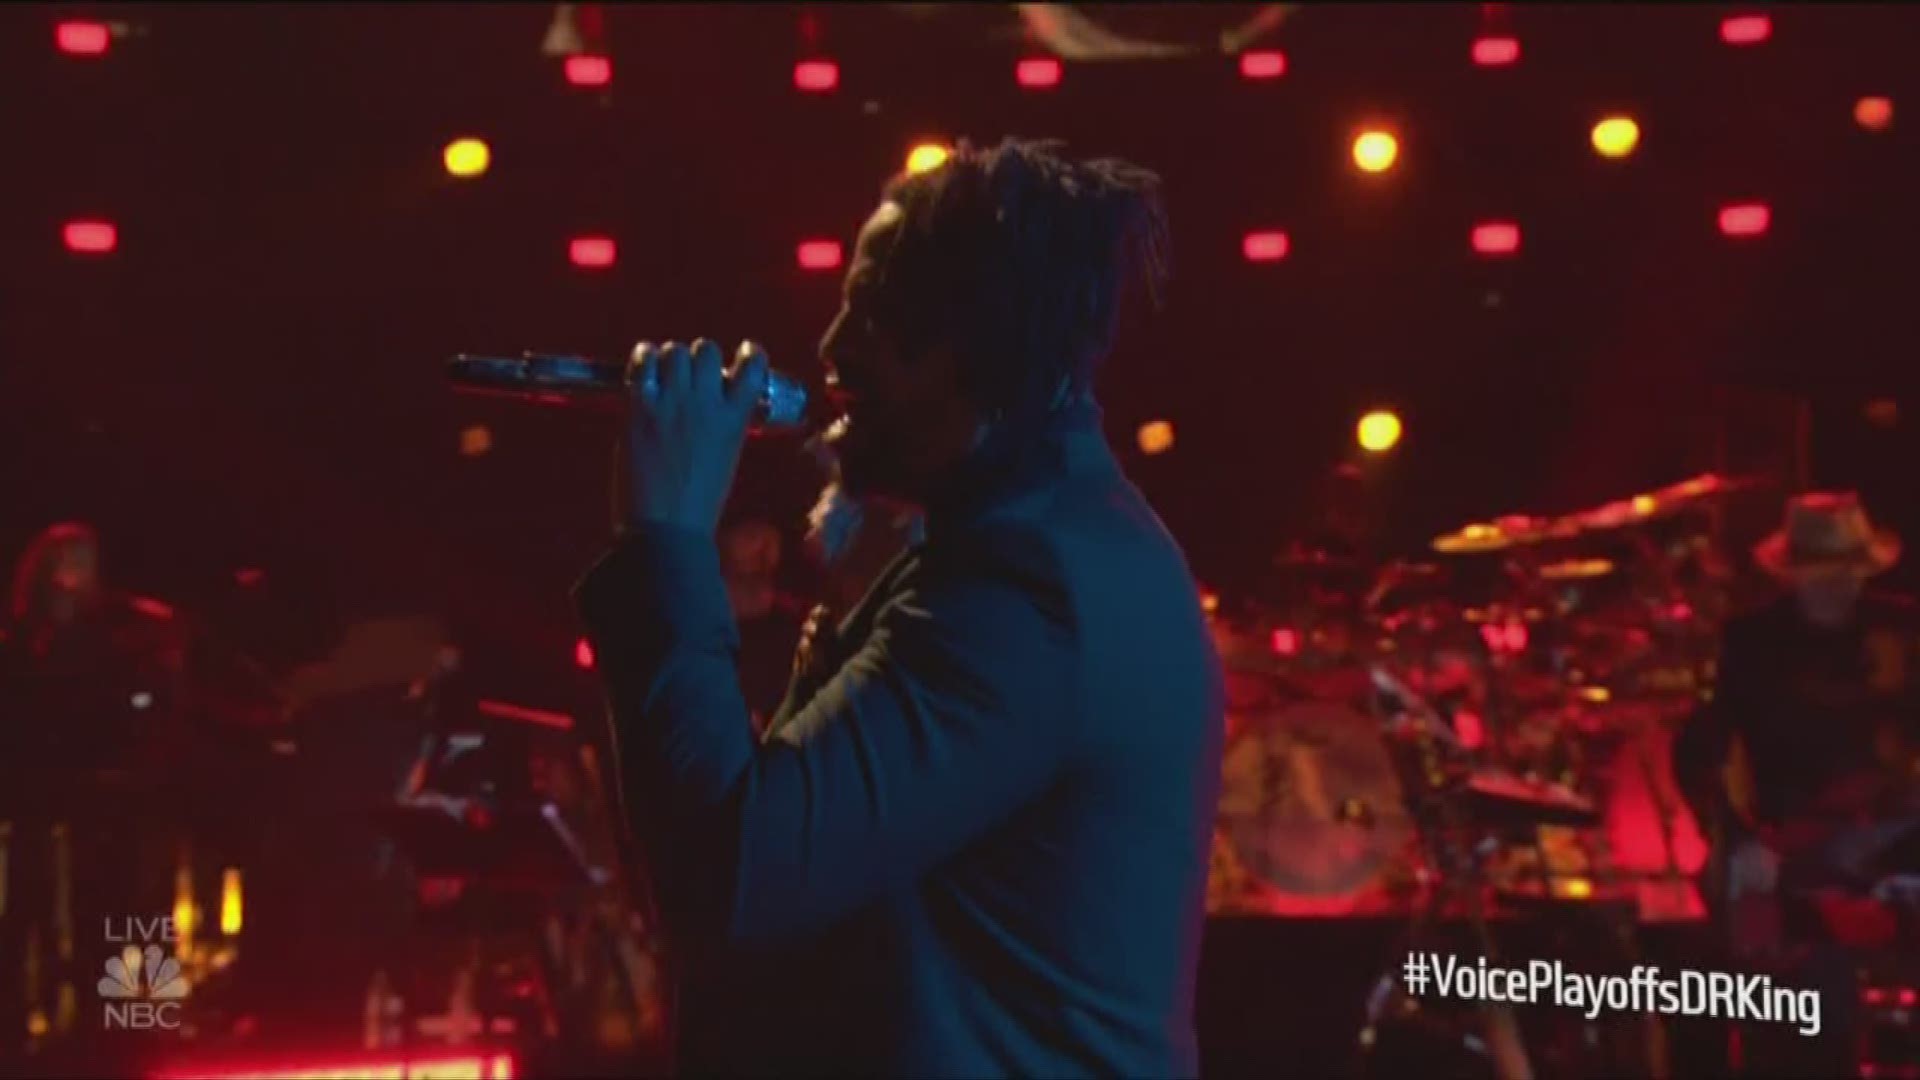 Cleveland's D.R. King takes center stage on NBC's 'The Voice'